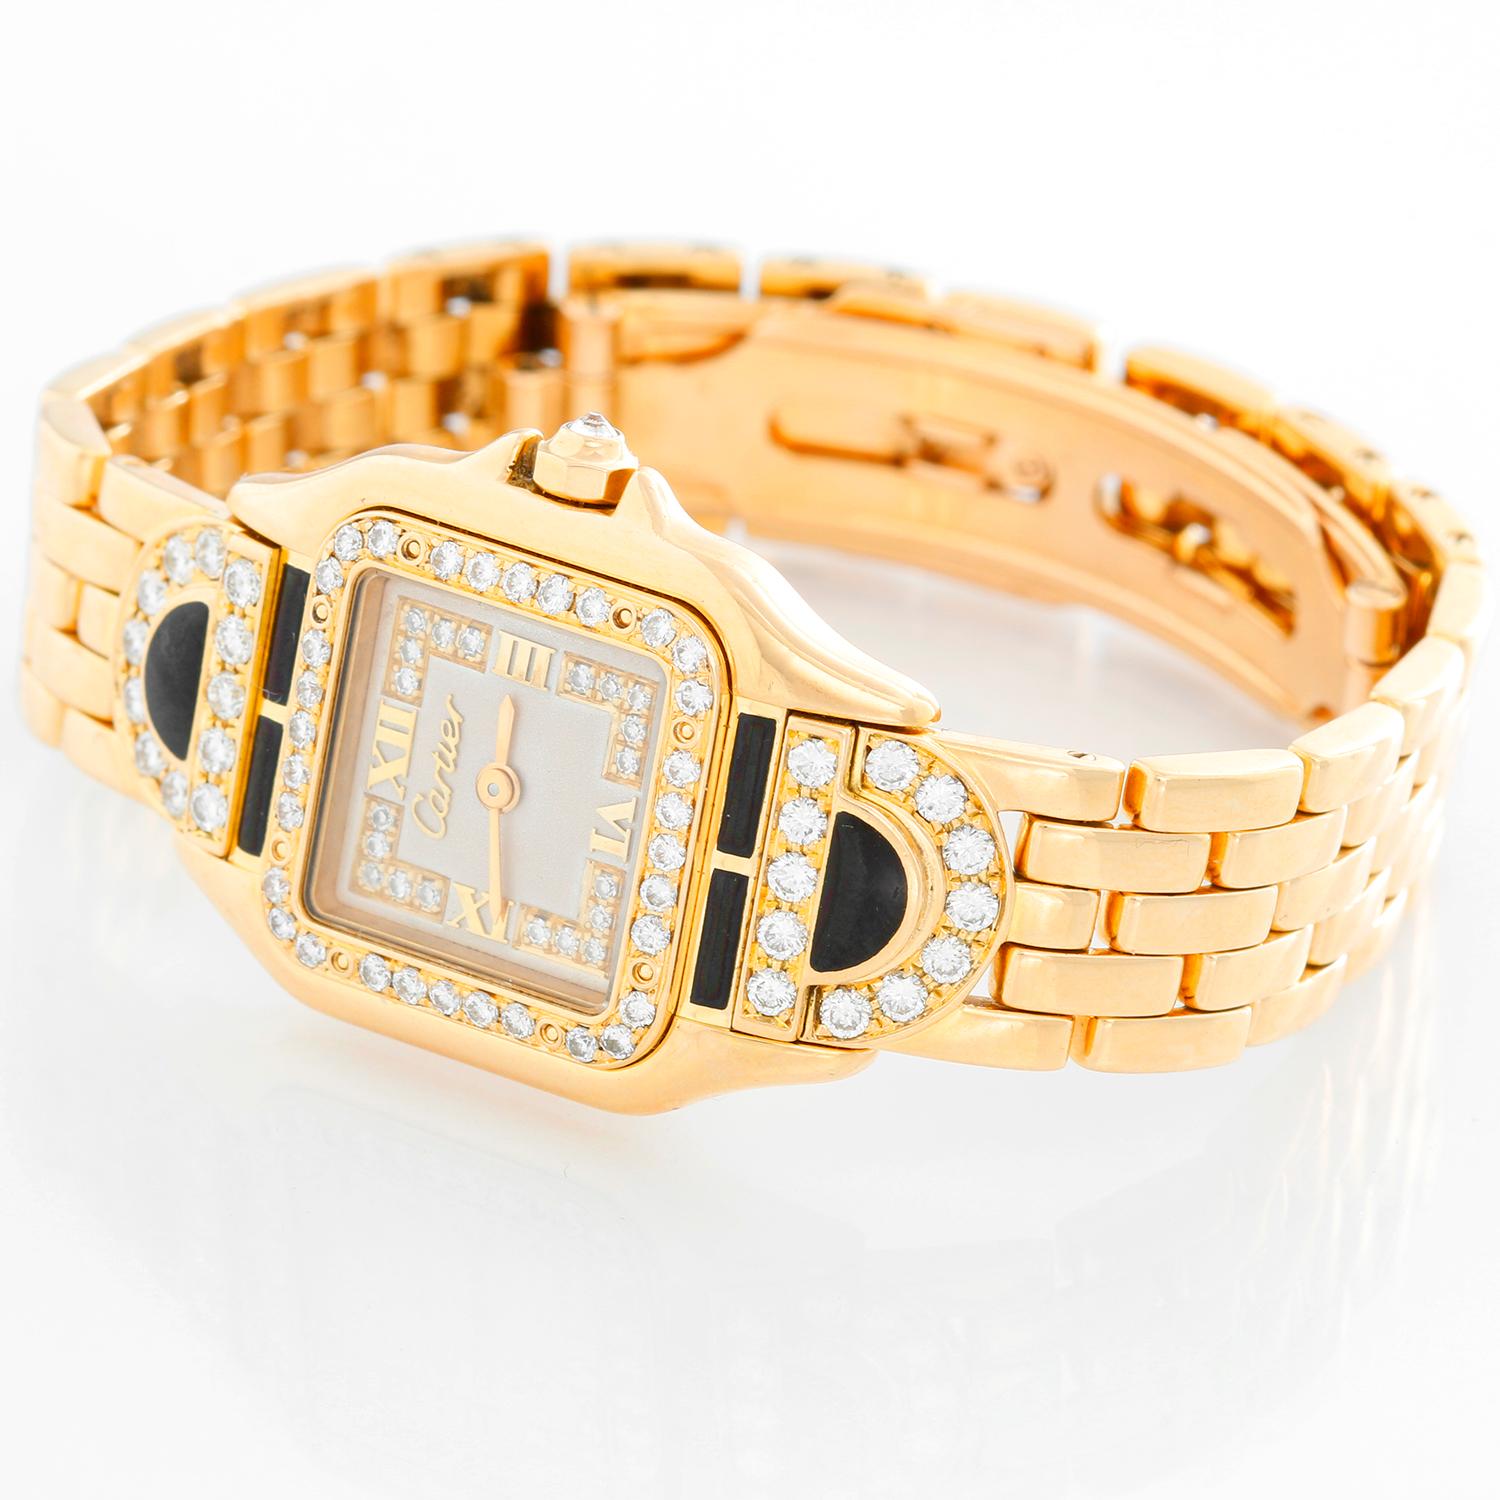 Cartier Panther Ladies 18k Yellow Gold Diamond Watch - Quartz. 18k yellow gold case with factory diamond bezel and lugs with black enamel (21mm x 30mm). Creme colored dial with diamonds and raised Roman numerals. 18k yellow gold Panther bracelet.